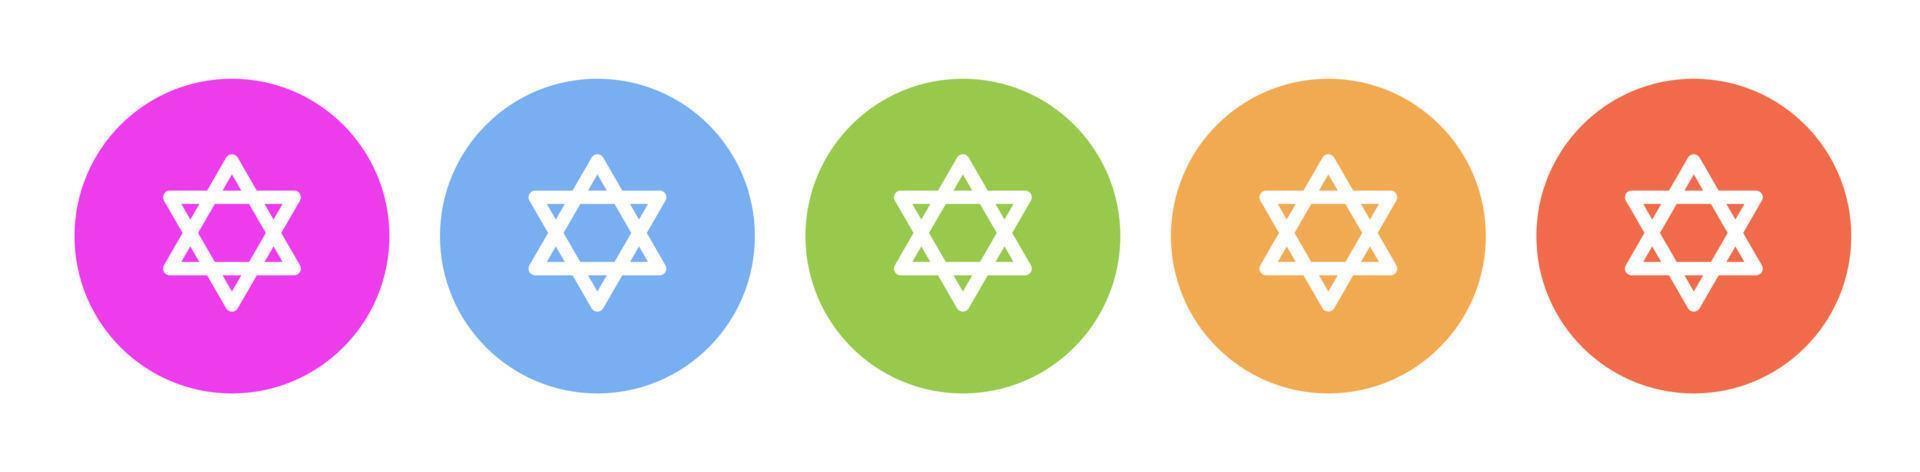 Multi colored flat icons on round backgrounds. Israel star of david multicolor circle vector icon on white background